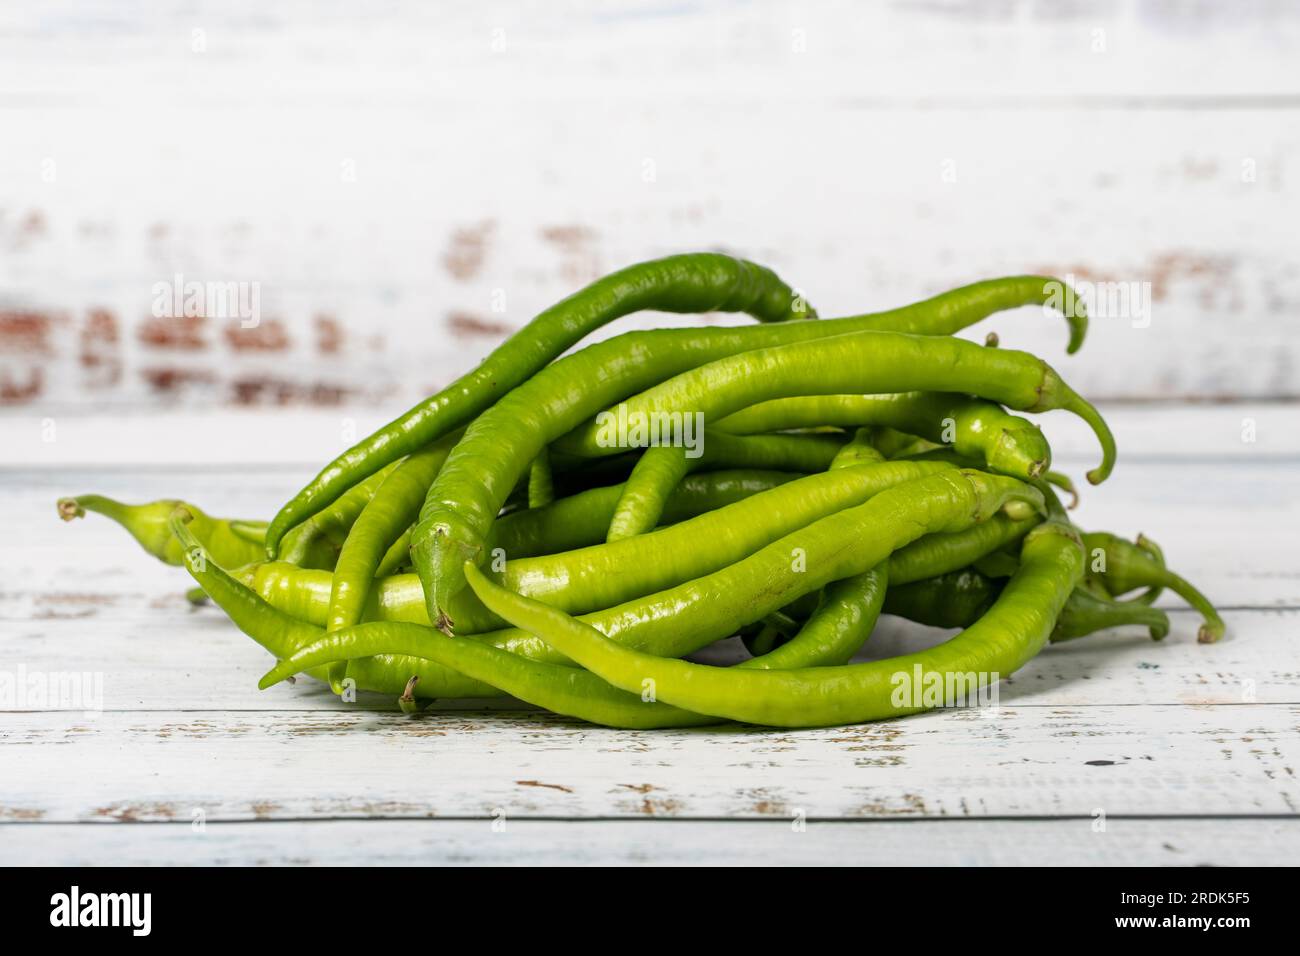 Green pepper on a white wood background. Fresh raw green chili pepper harvest season concept. Vegetables for a healthy diet Stock Photo